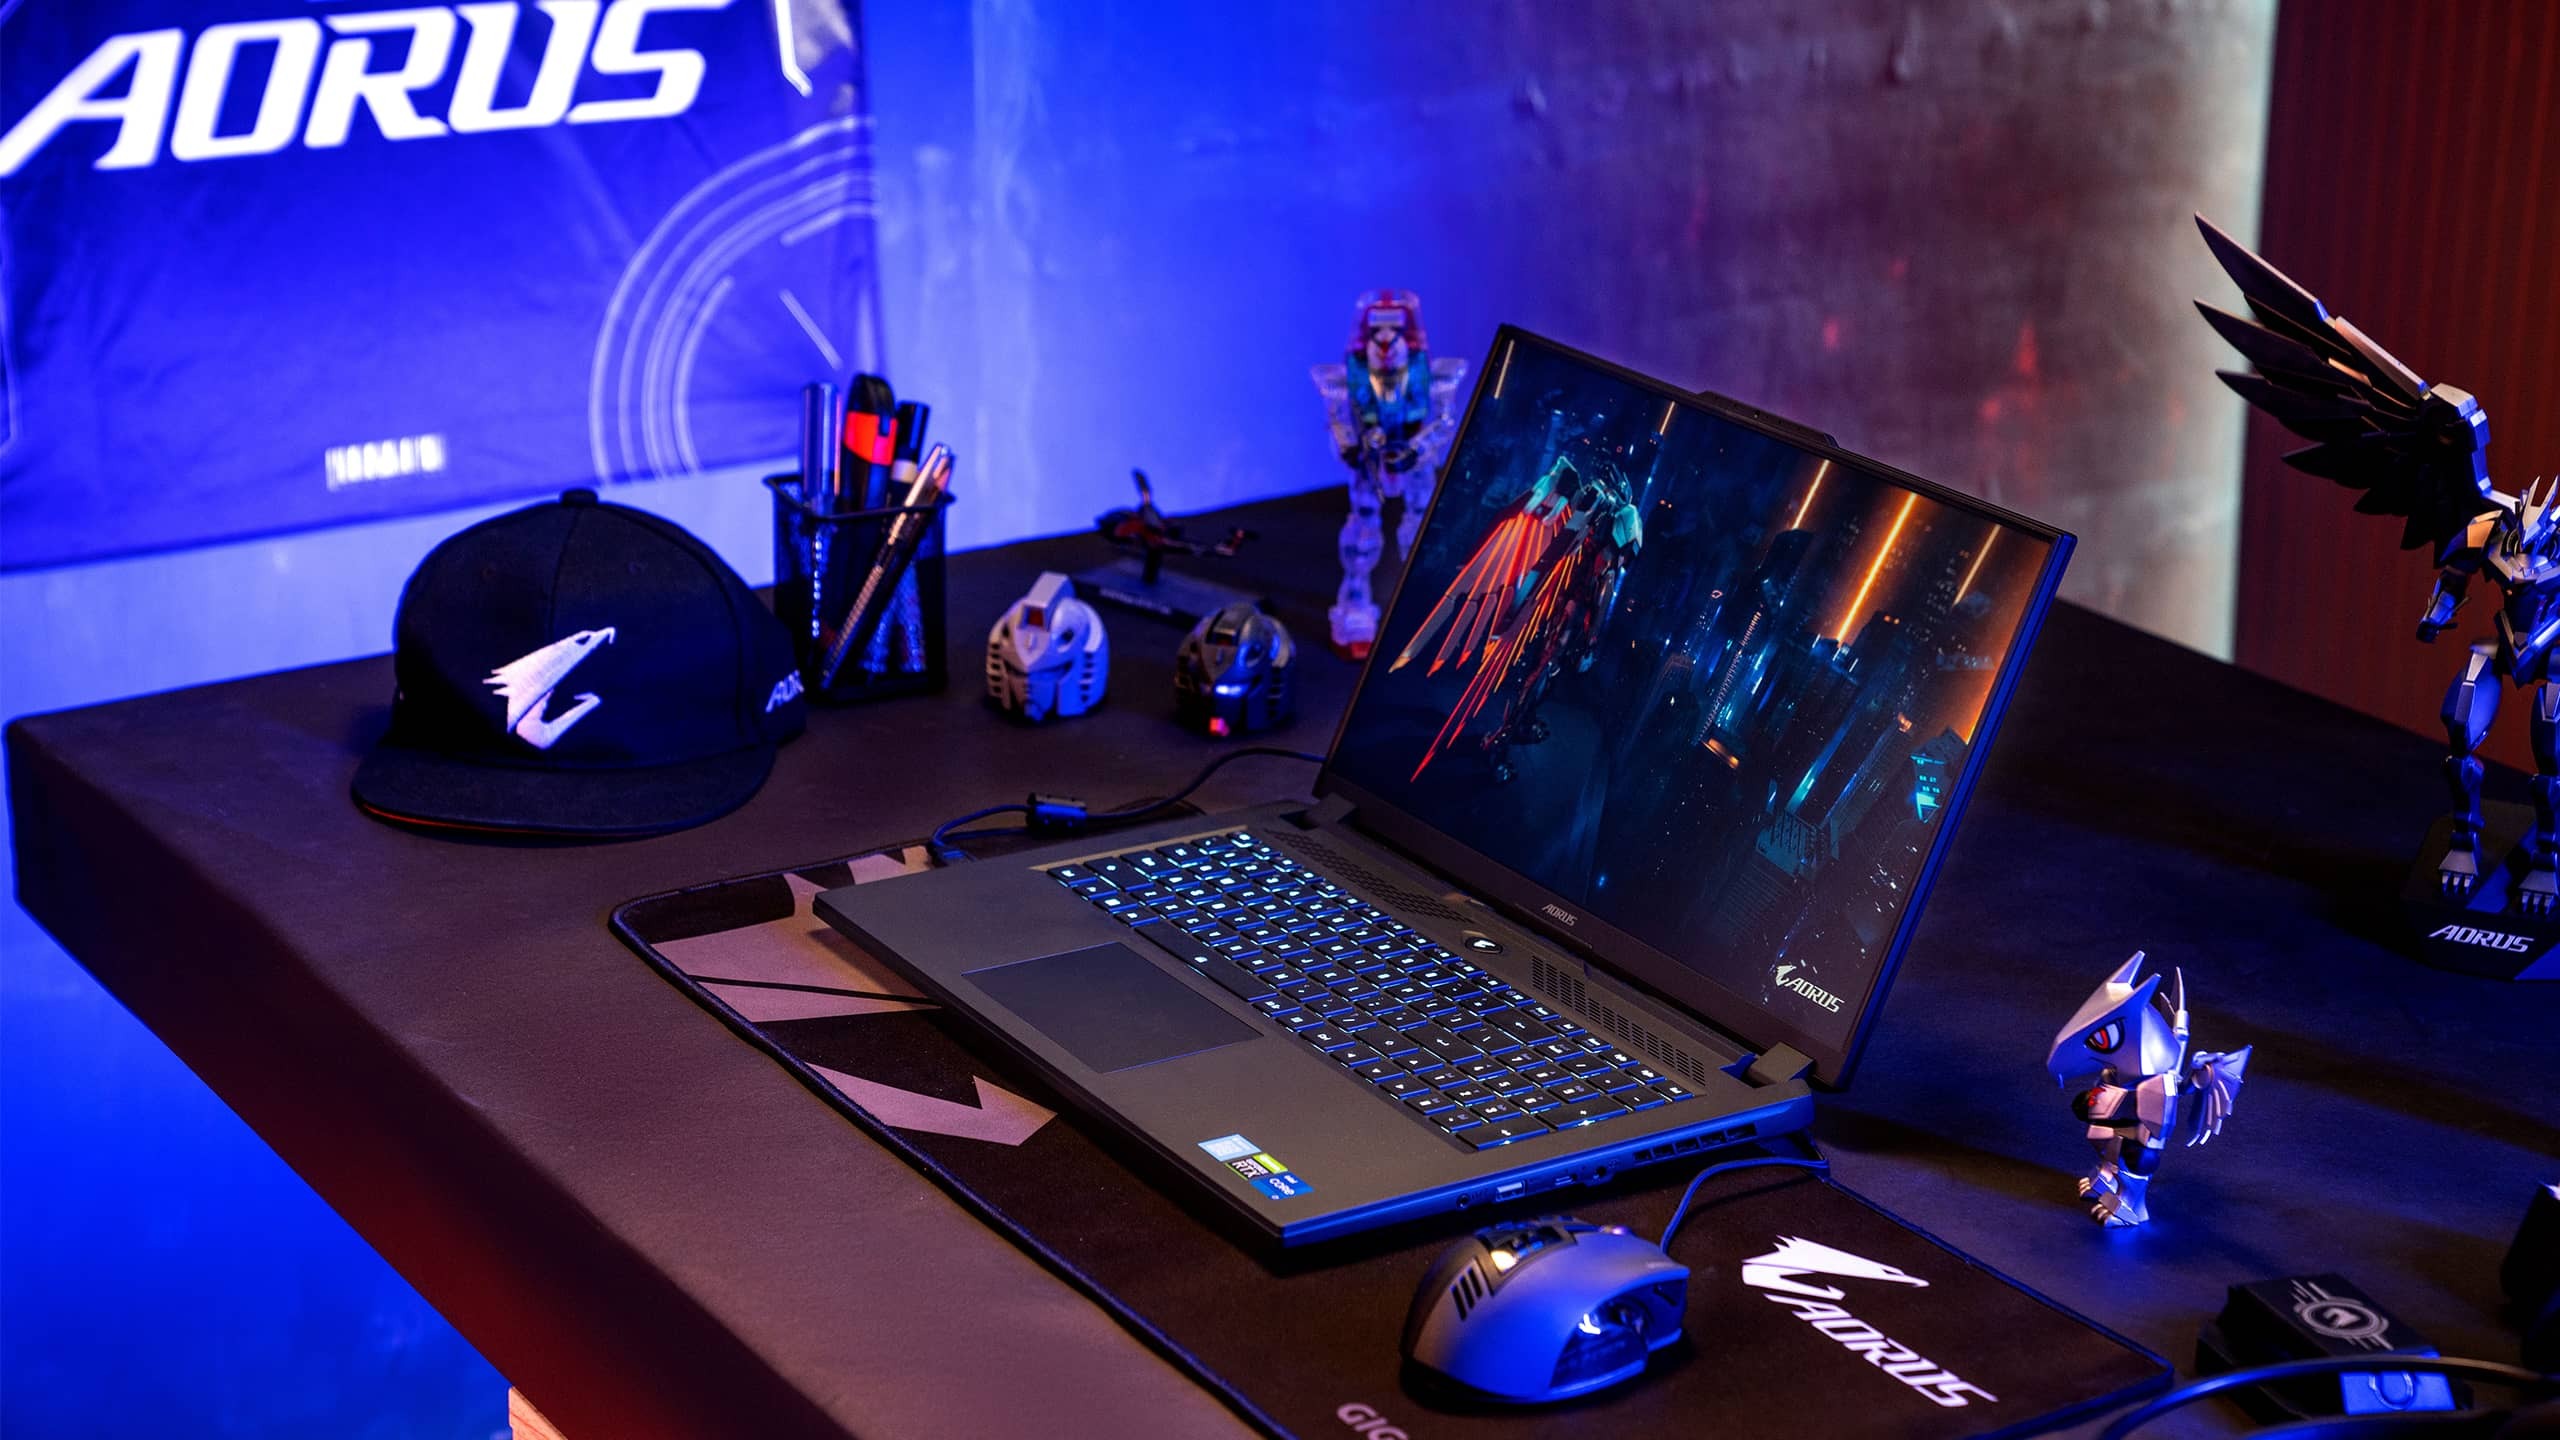 Member Submission】Ace's 2021 AORUS Room & Gaming Setup Tour